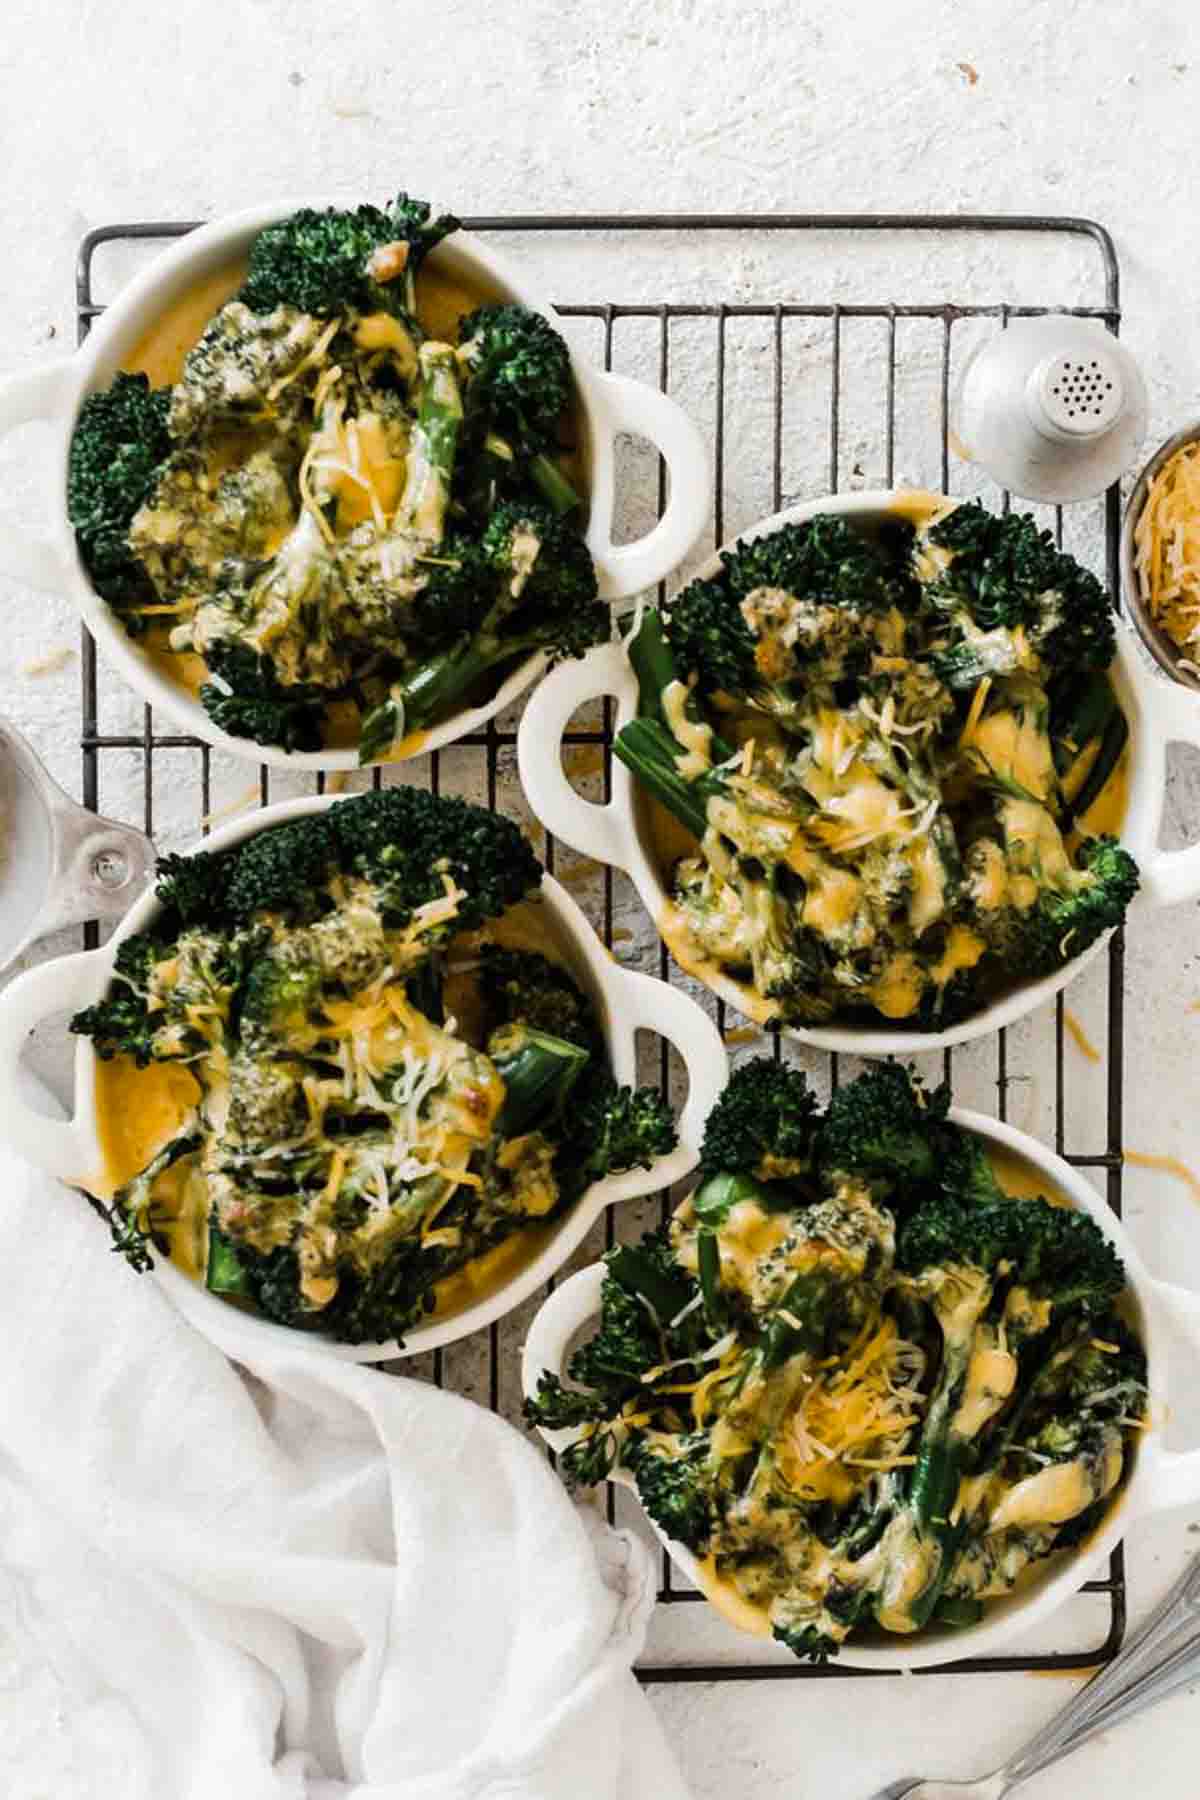 Small dishes of broccoli and cheese sauce on a cooling rack.